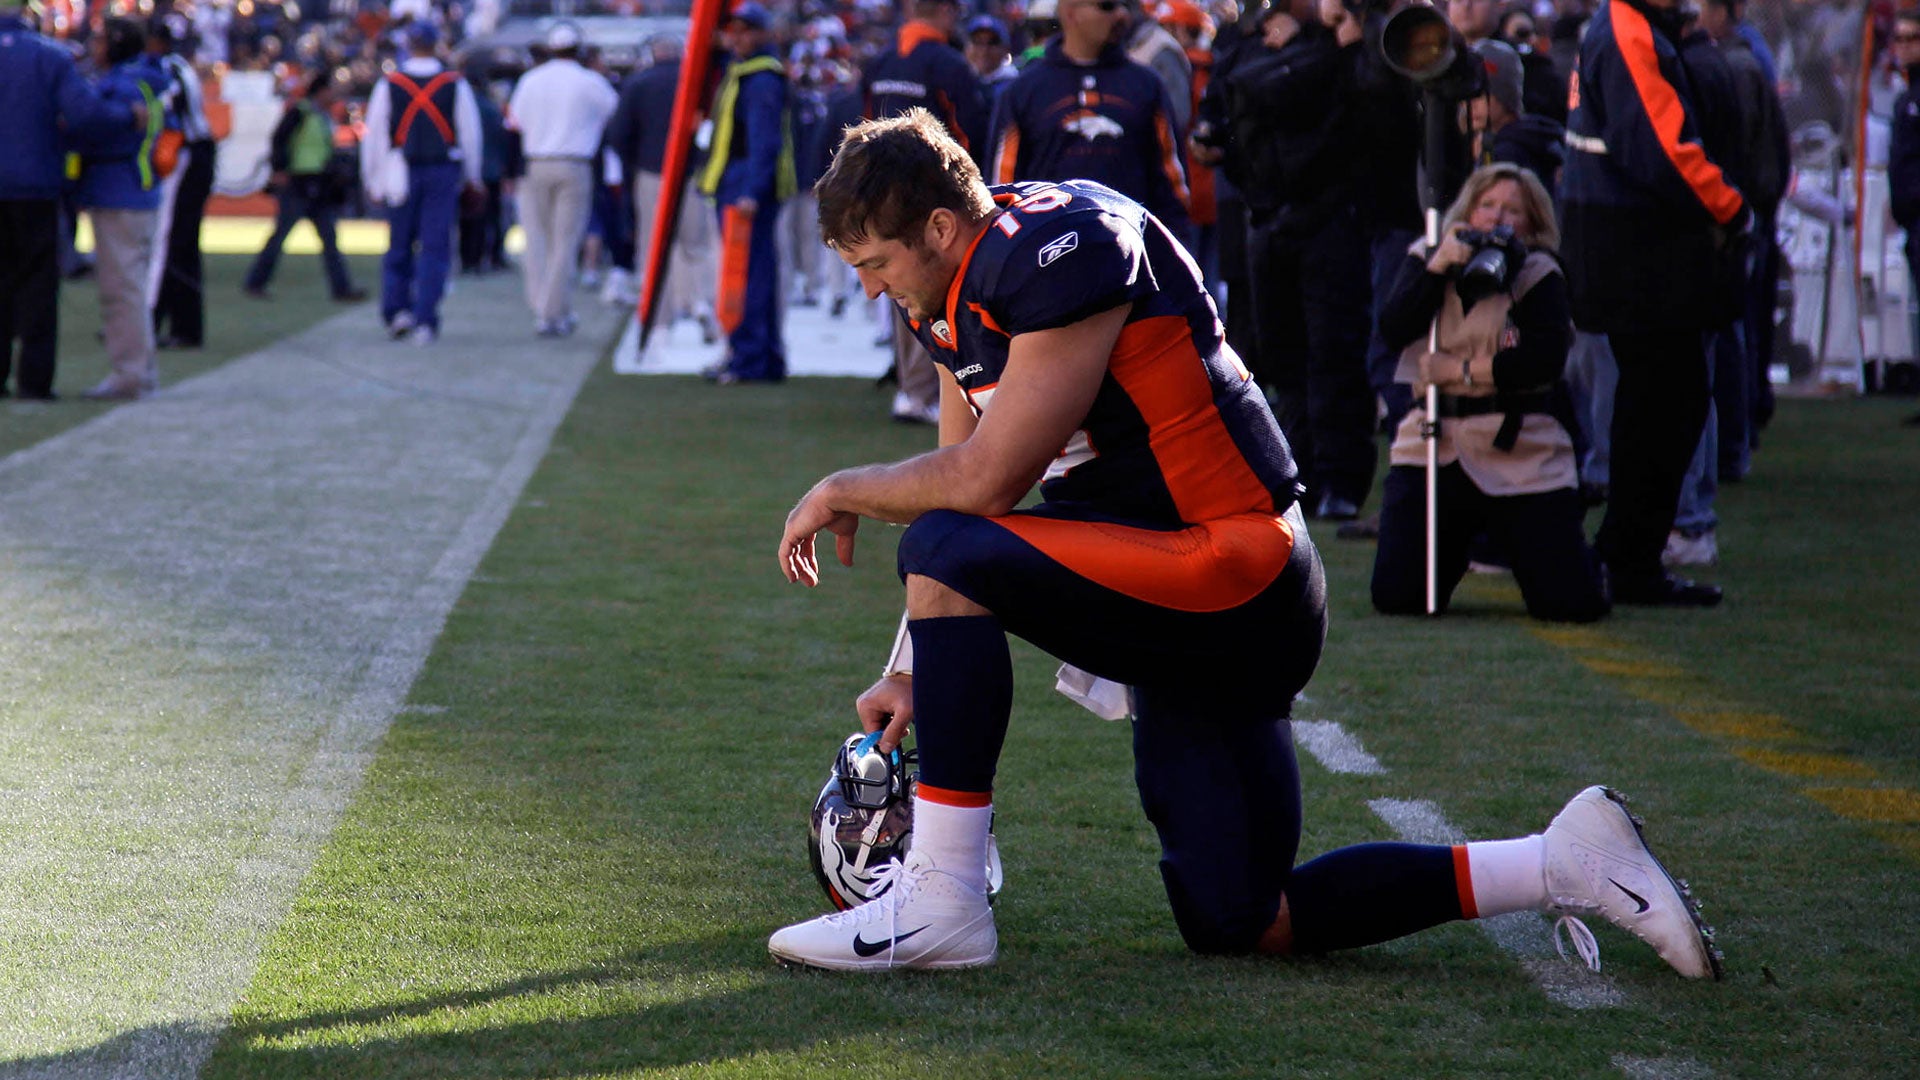 Tebow Prime Example of Media's Double Standard on Taking a or Taking a Stand CBN